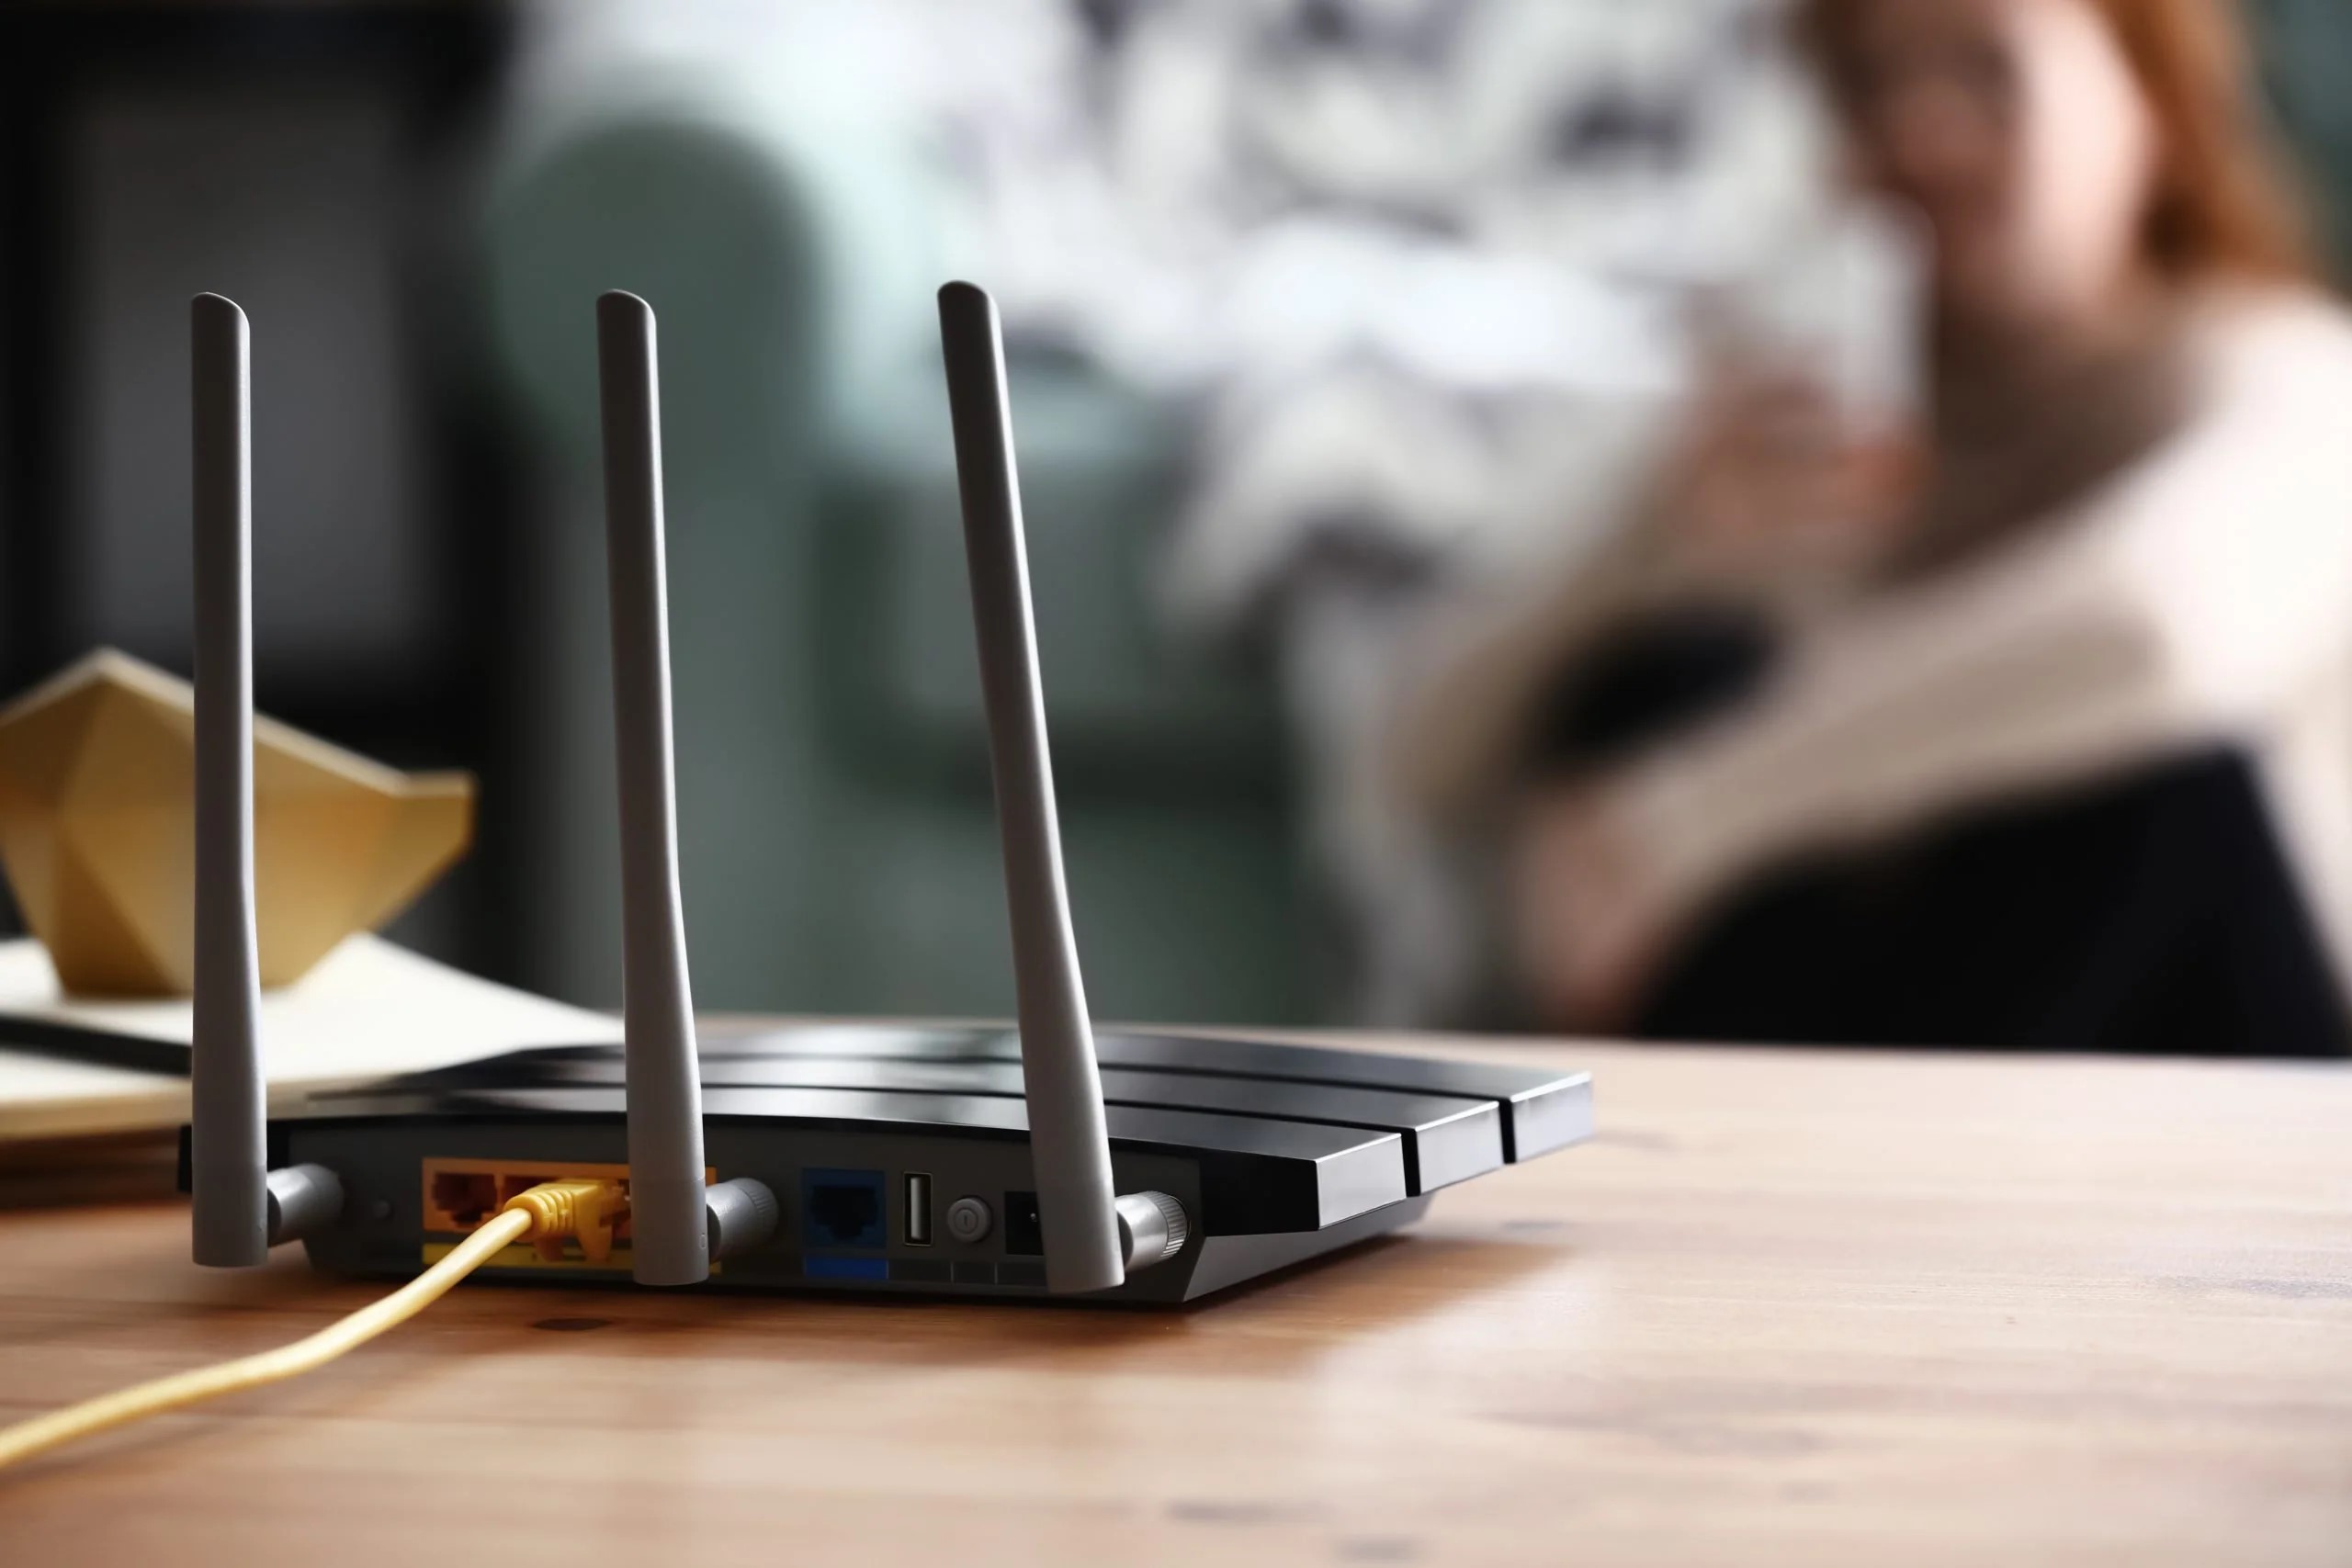 How To Secure My Wi-Fi Router